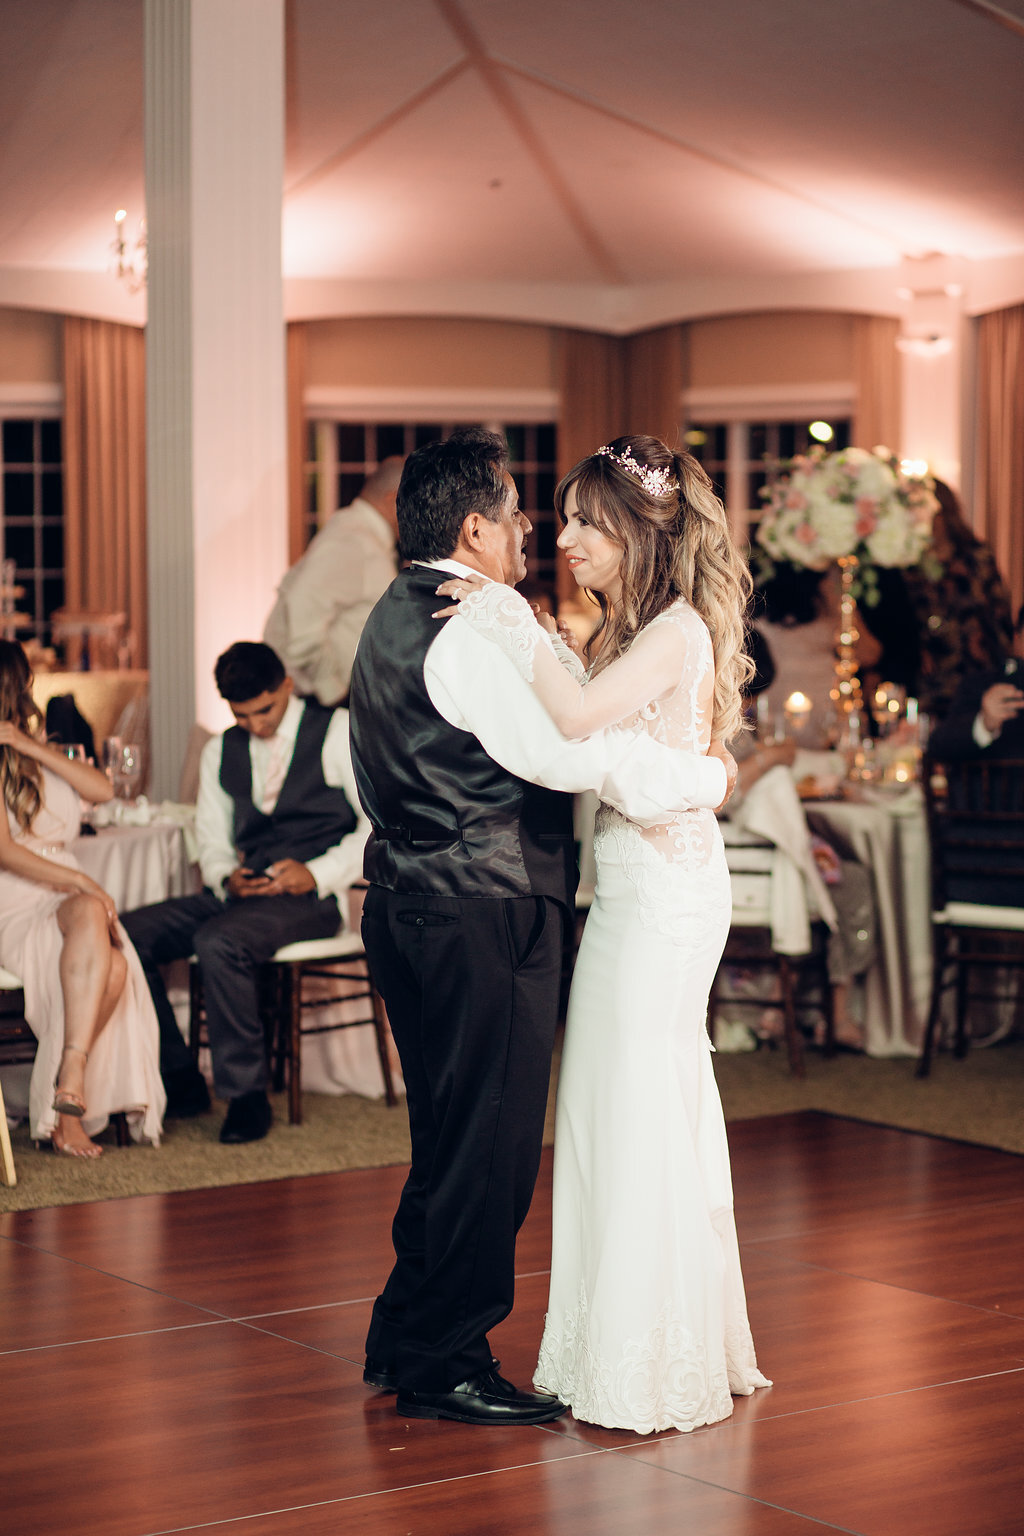 Wedding Photograph Of Man In Black Suit And Bride Dancing Side View Los Angeles